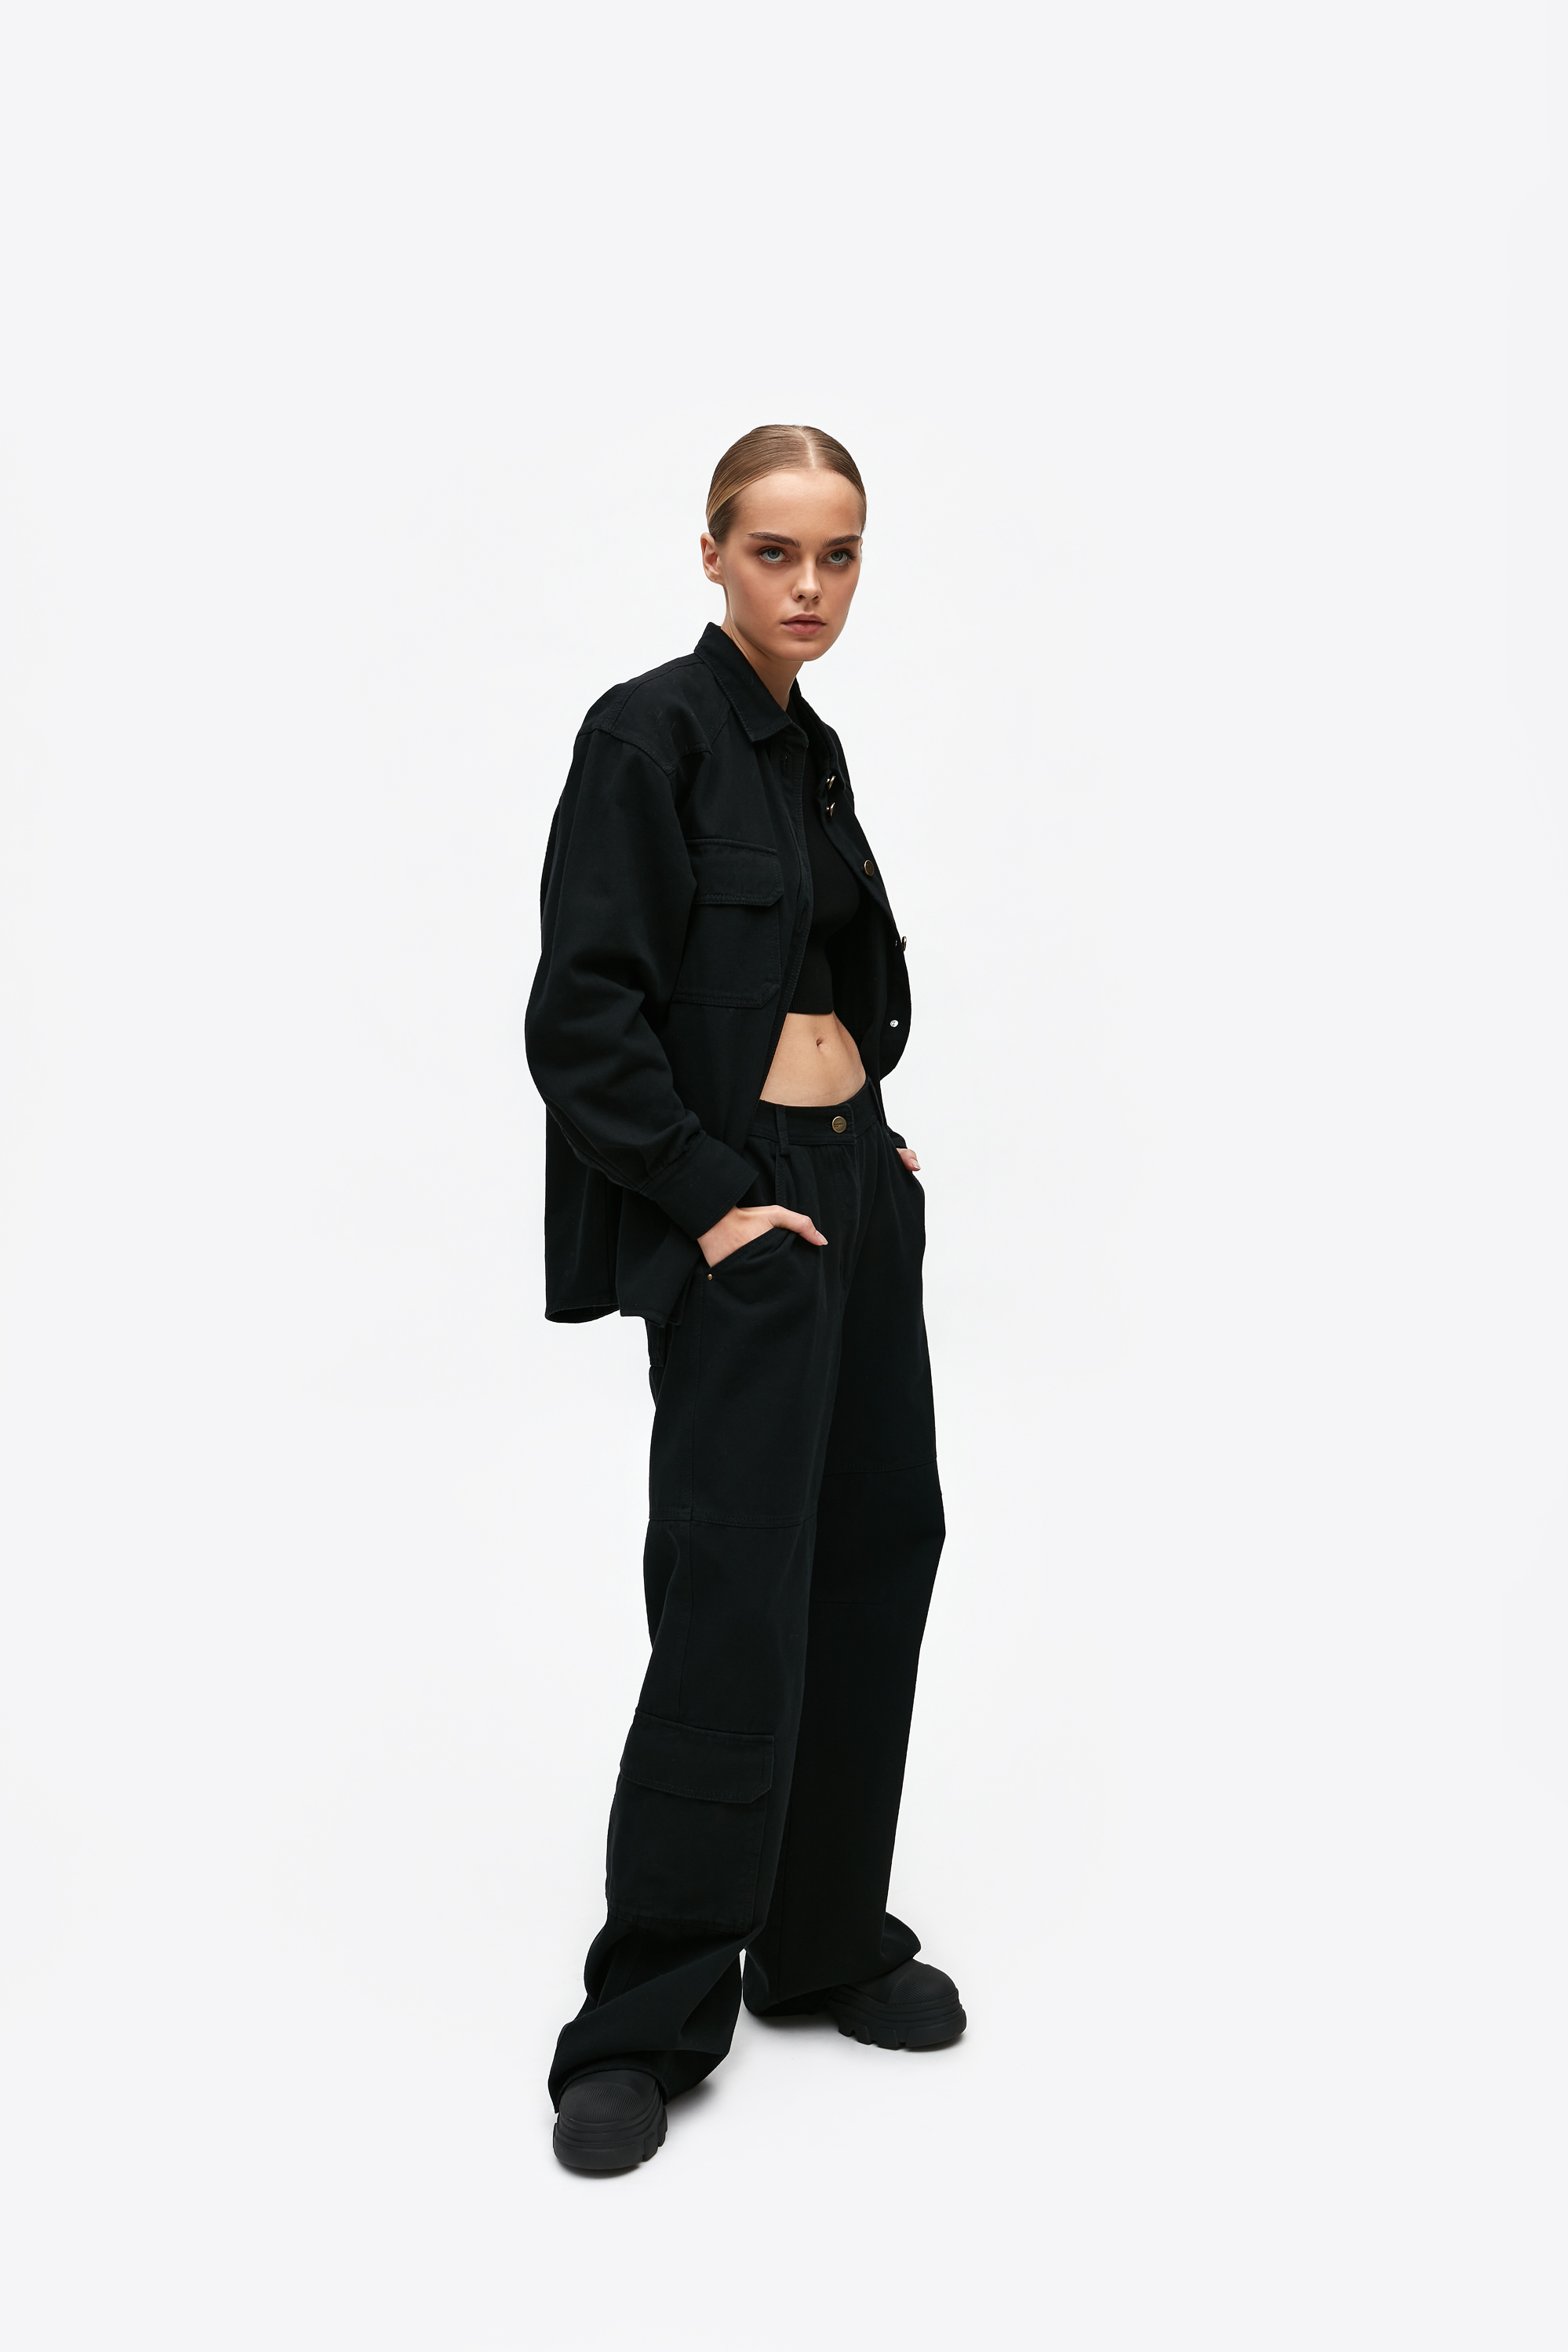 Trousers 4313-01 Black from BRUSNiKA